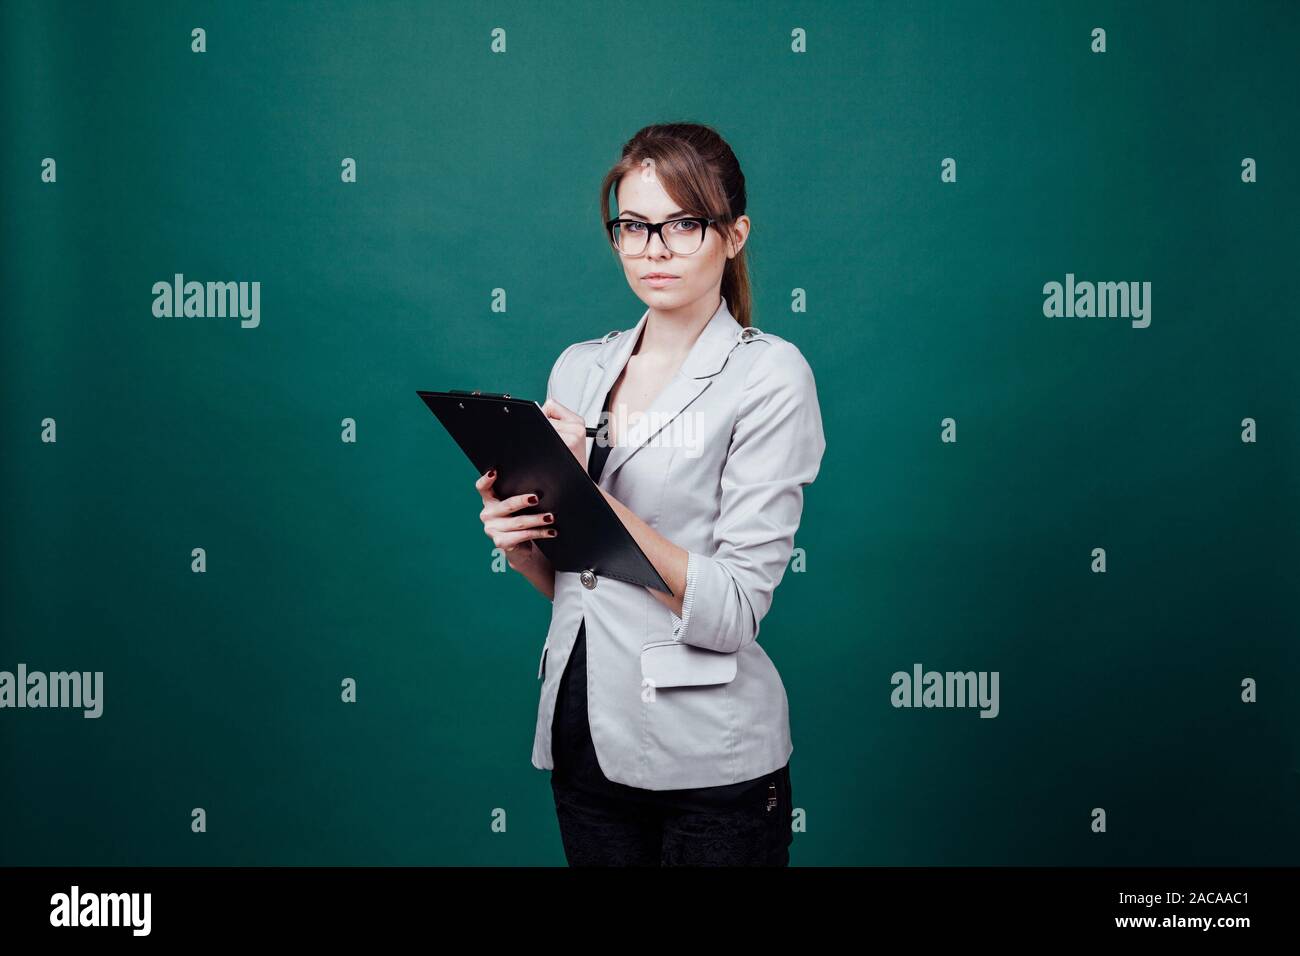 teacher in a business suit stands at green board Stock Photo - Alamy